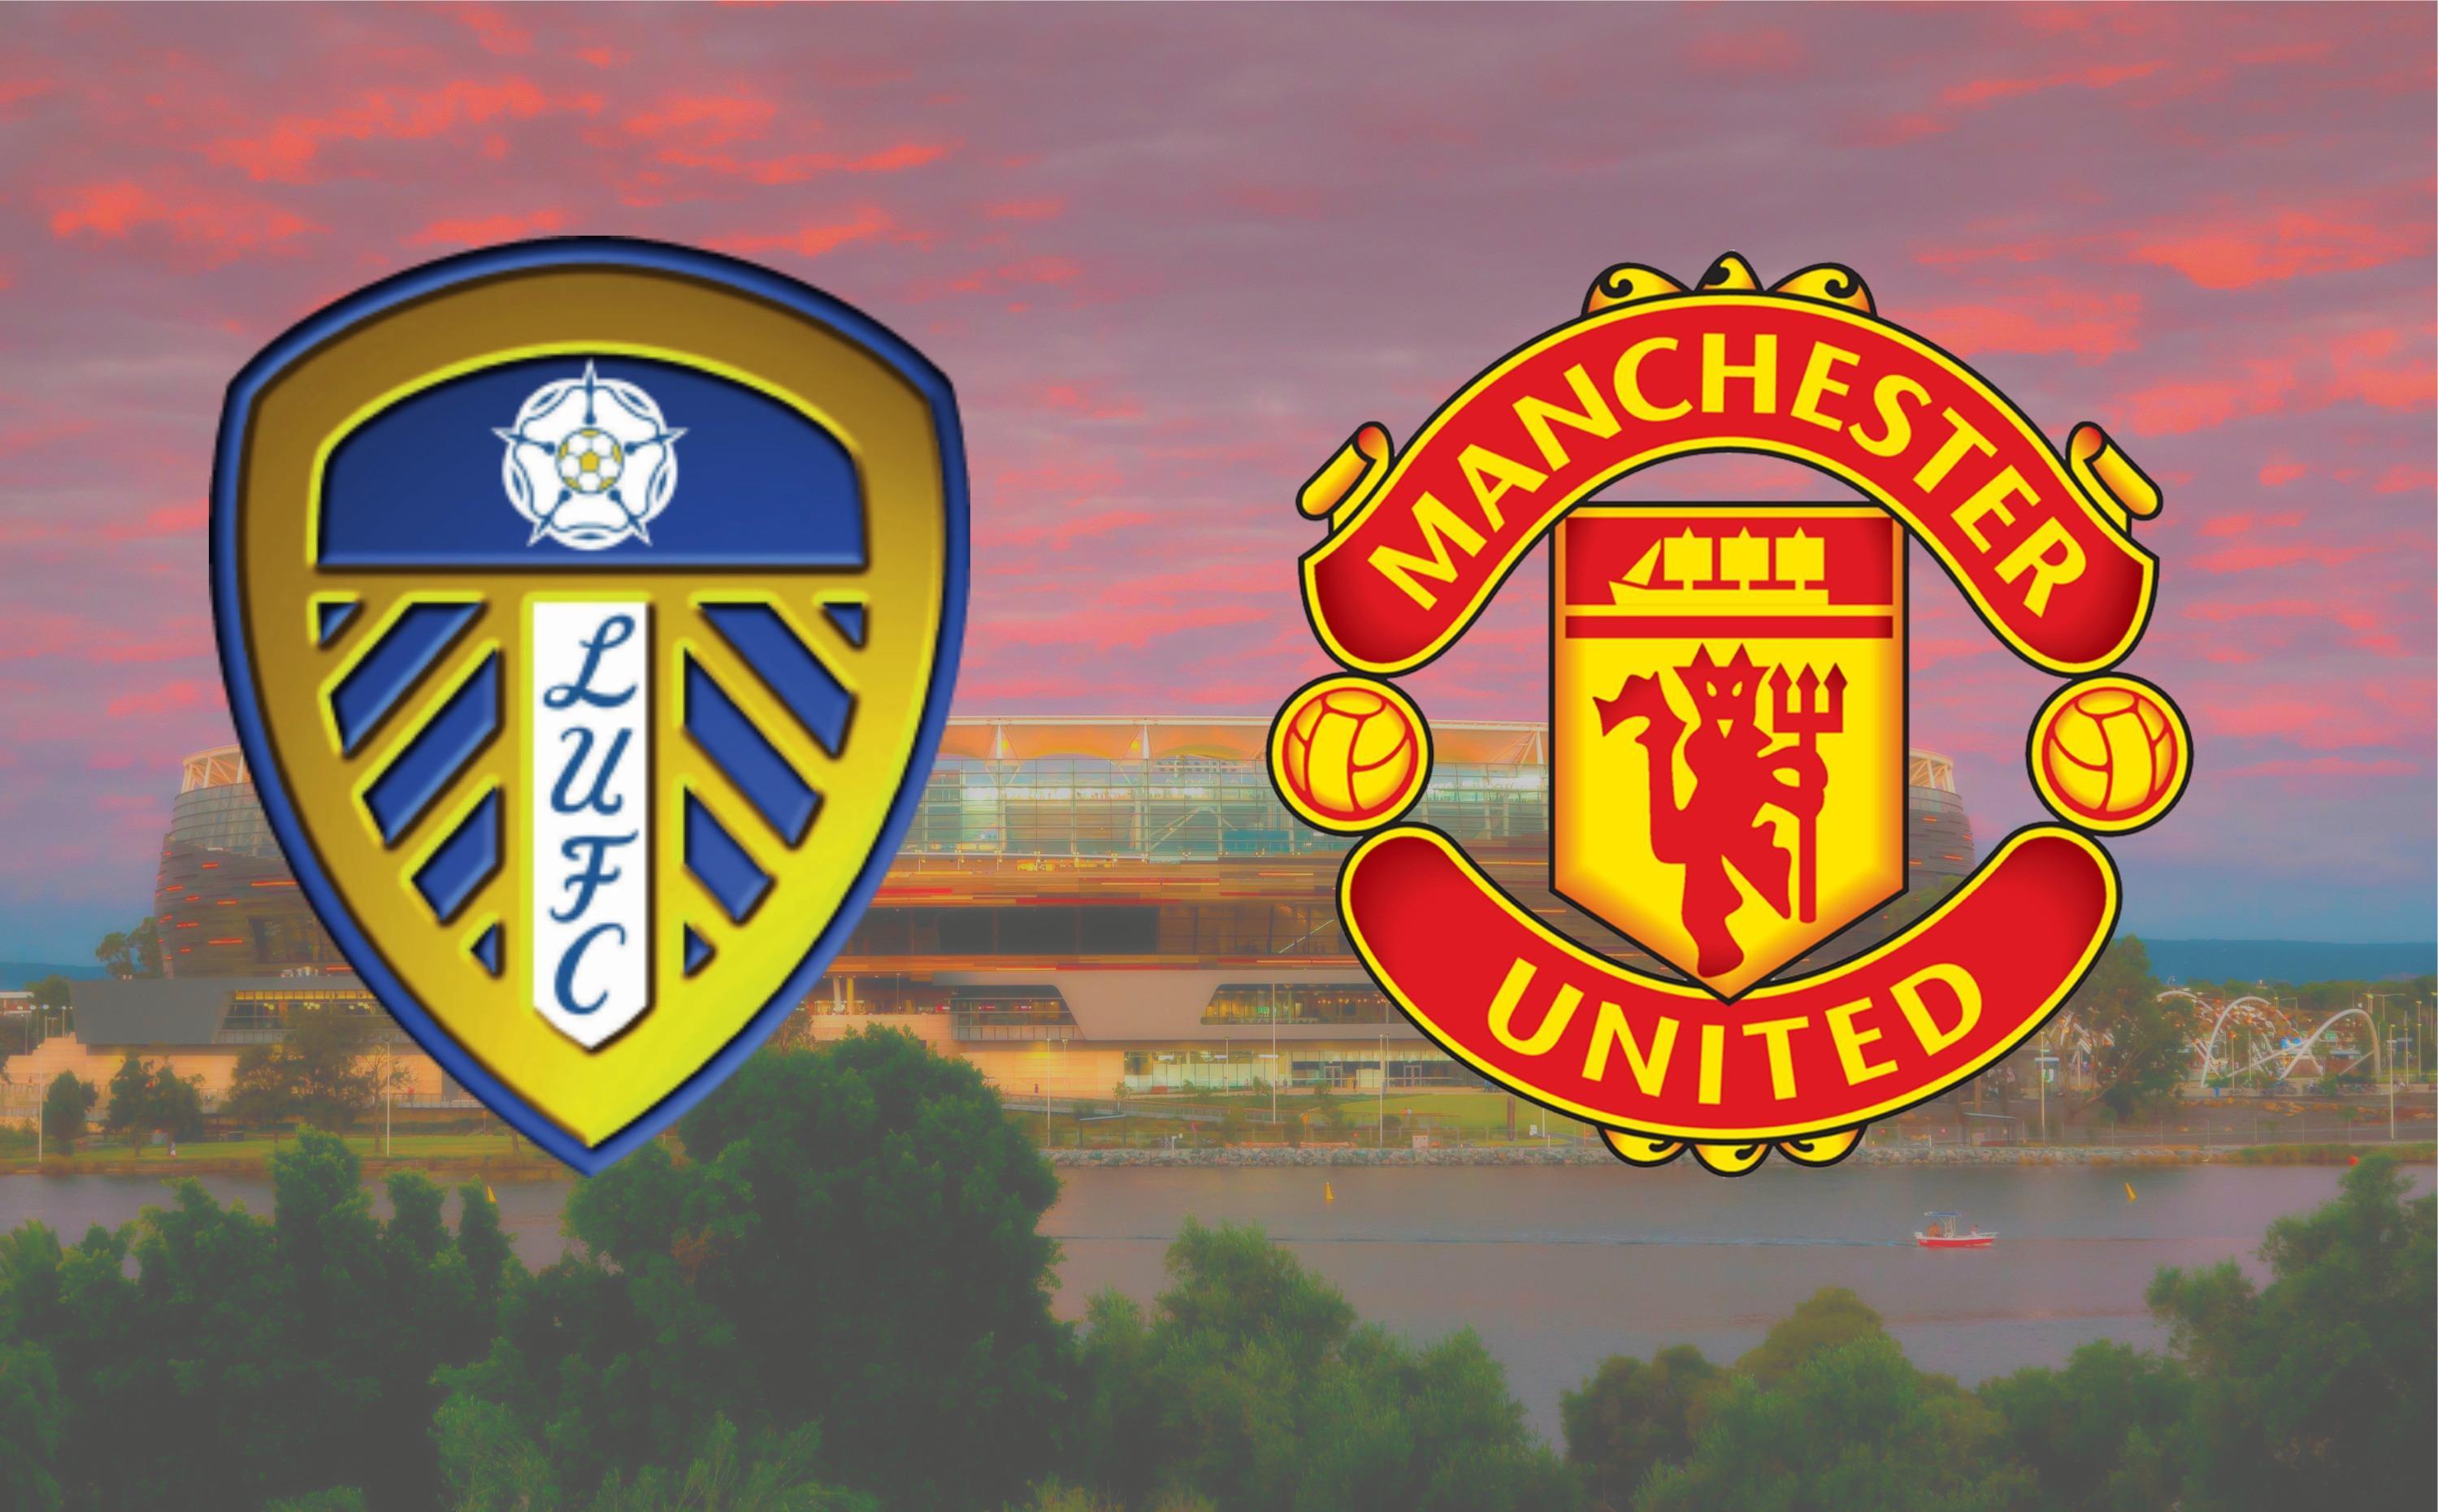 Manchester United & Leeds rivalry comes to Optus Stadium